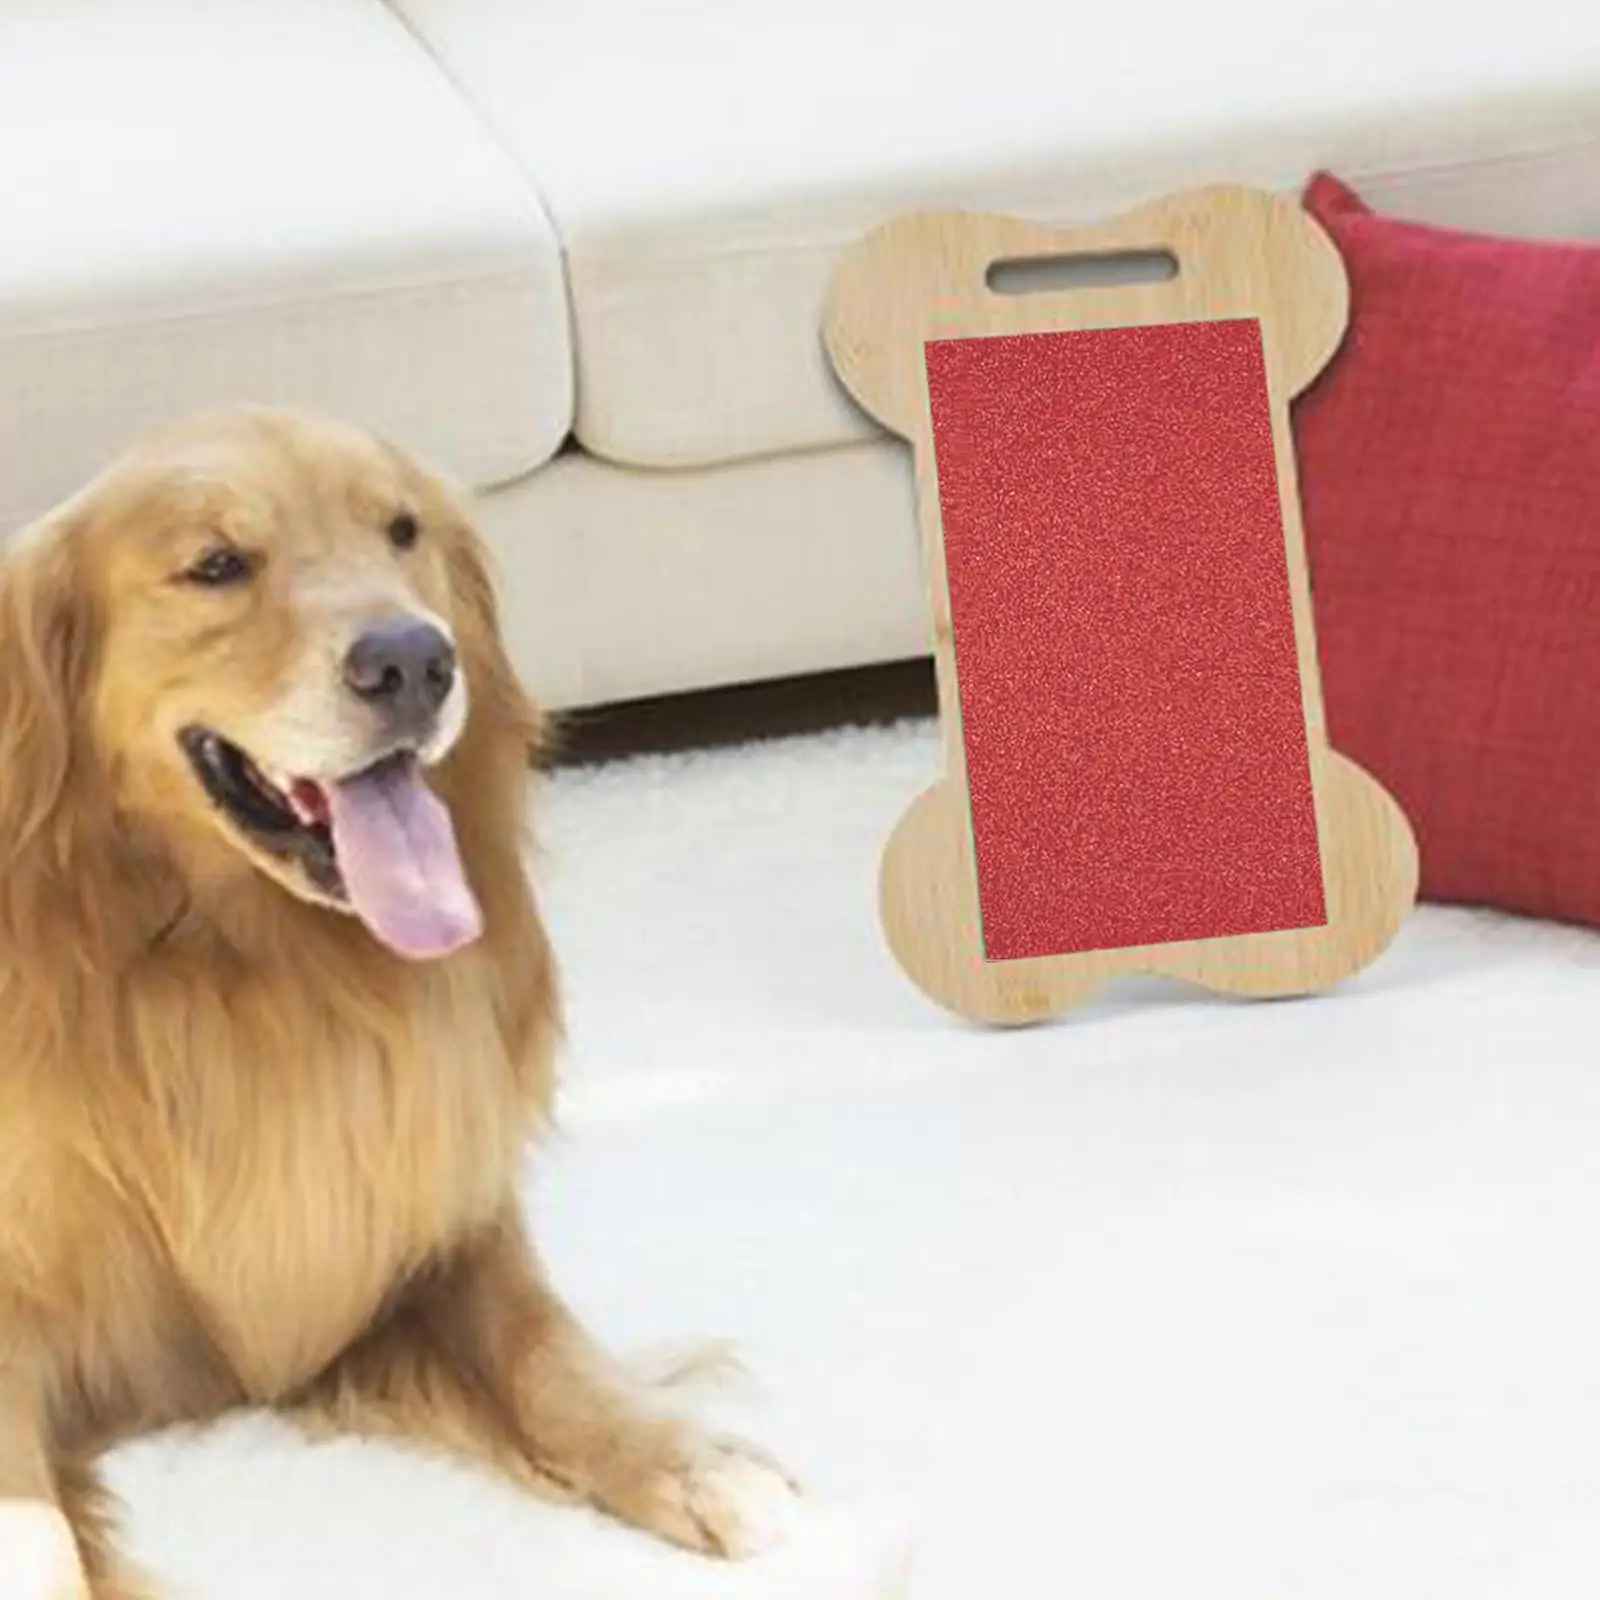 Dog Scratching Pad for Nails Toy Stress Resistant Wooden Dog Scratch Pad for Nails for Dogs Paw Play